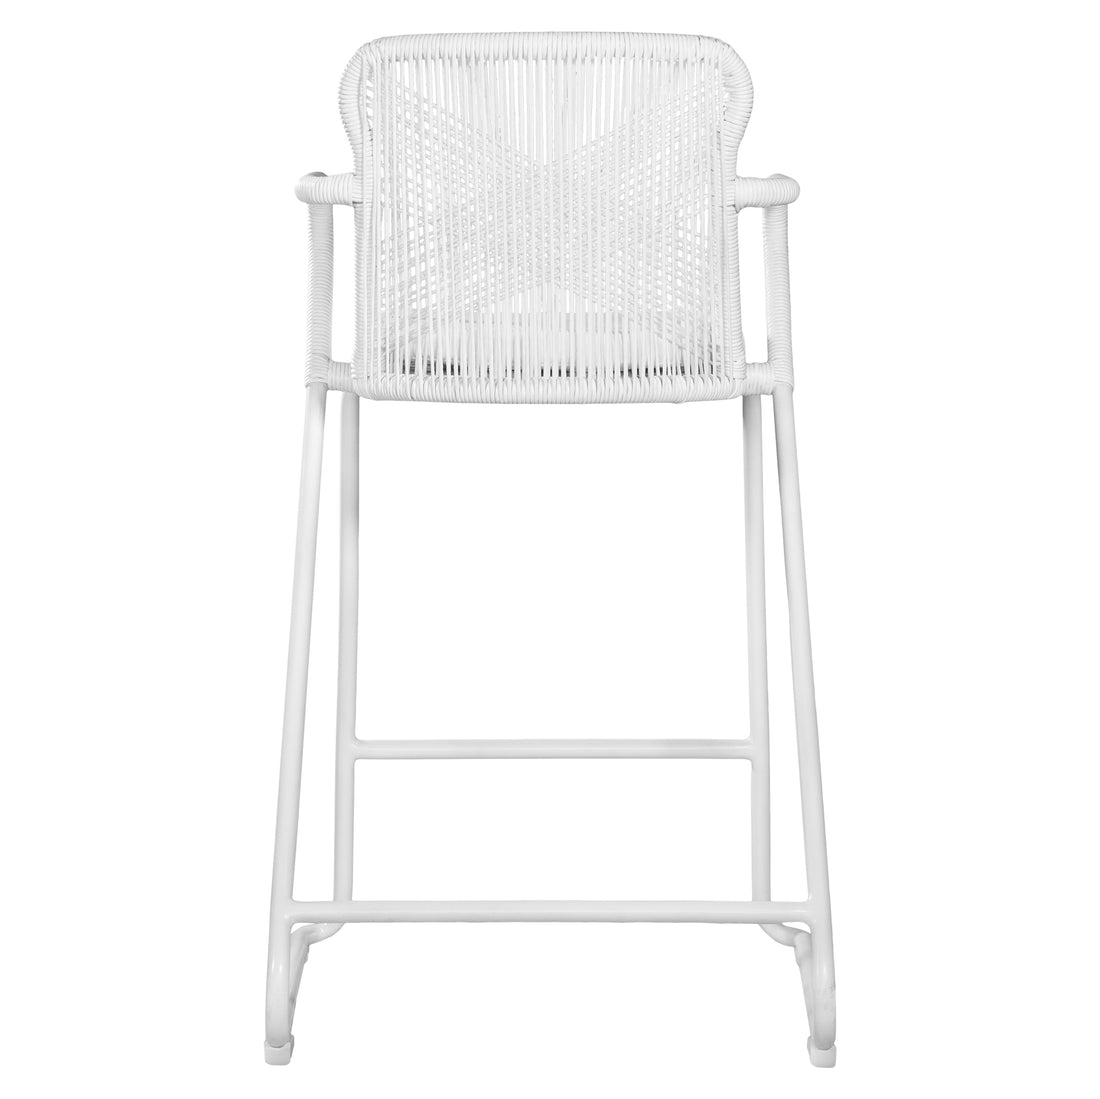 Indaaba Barchair | White